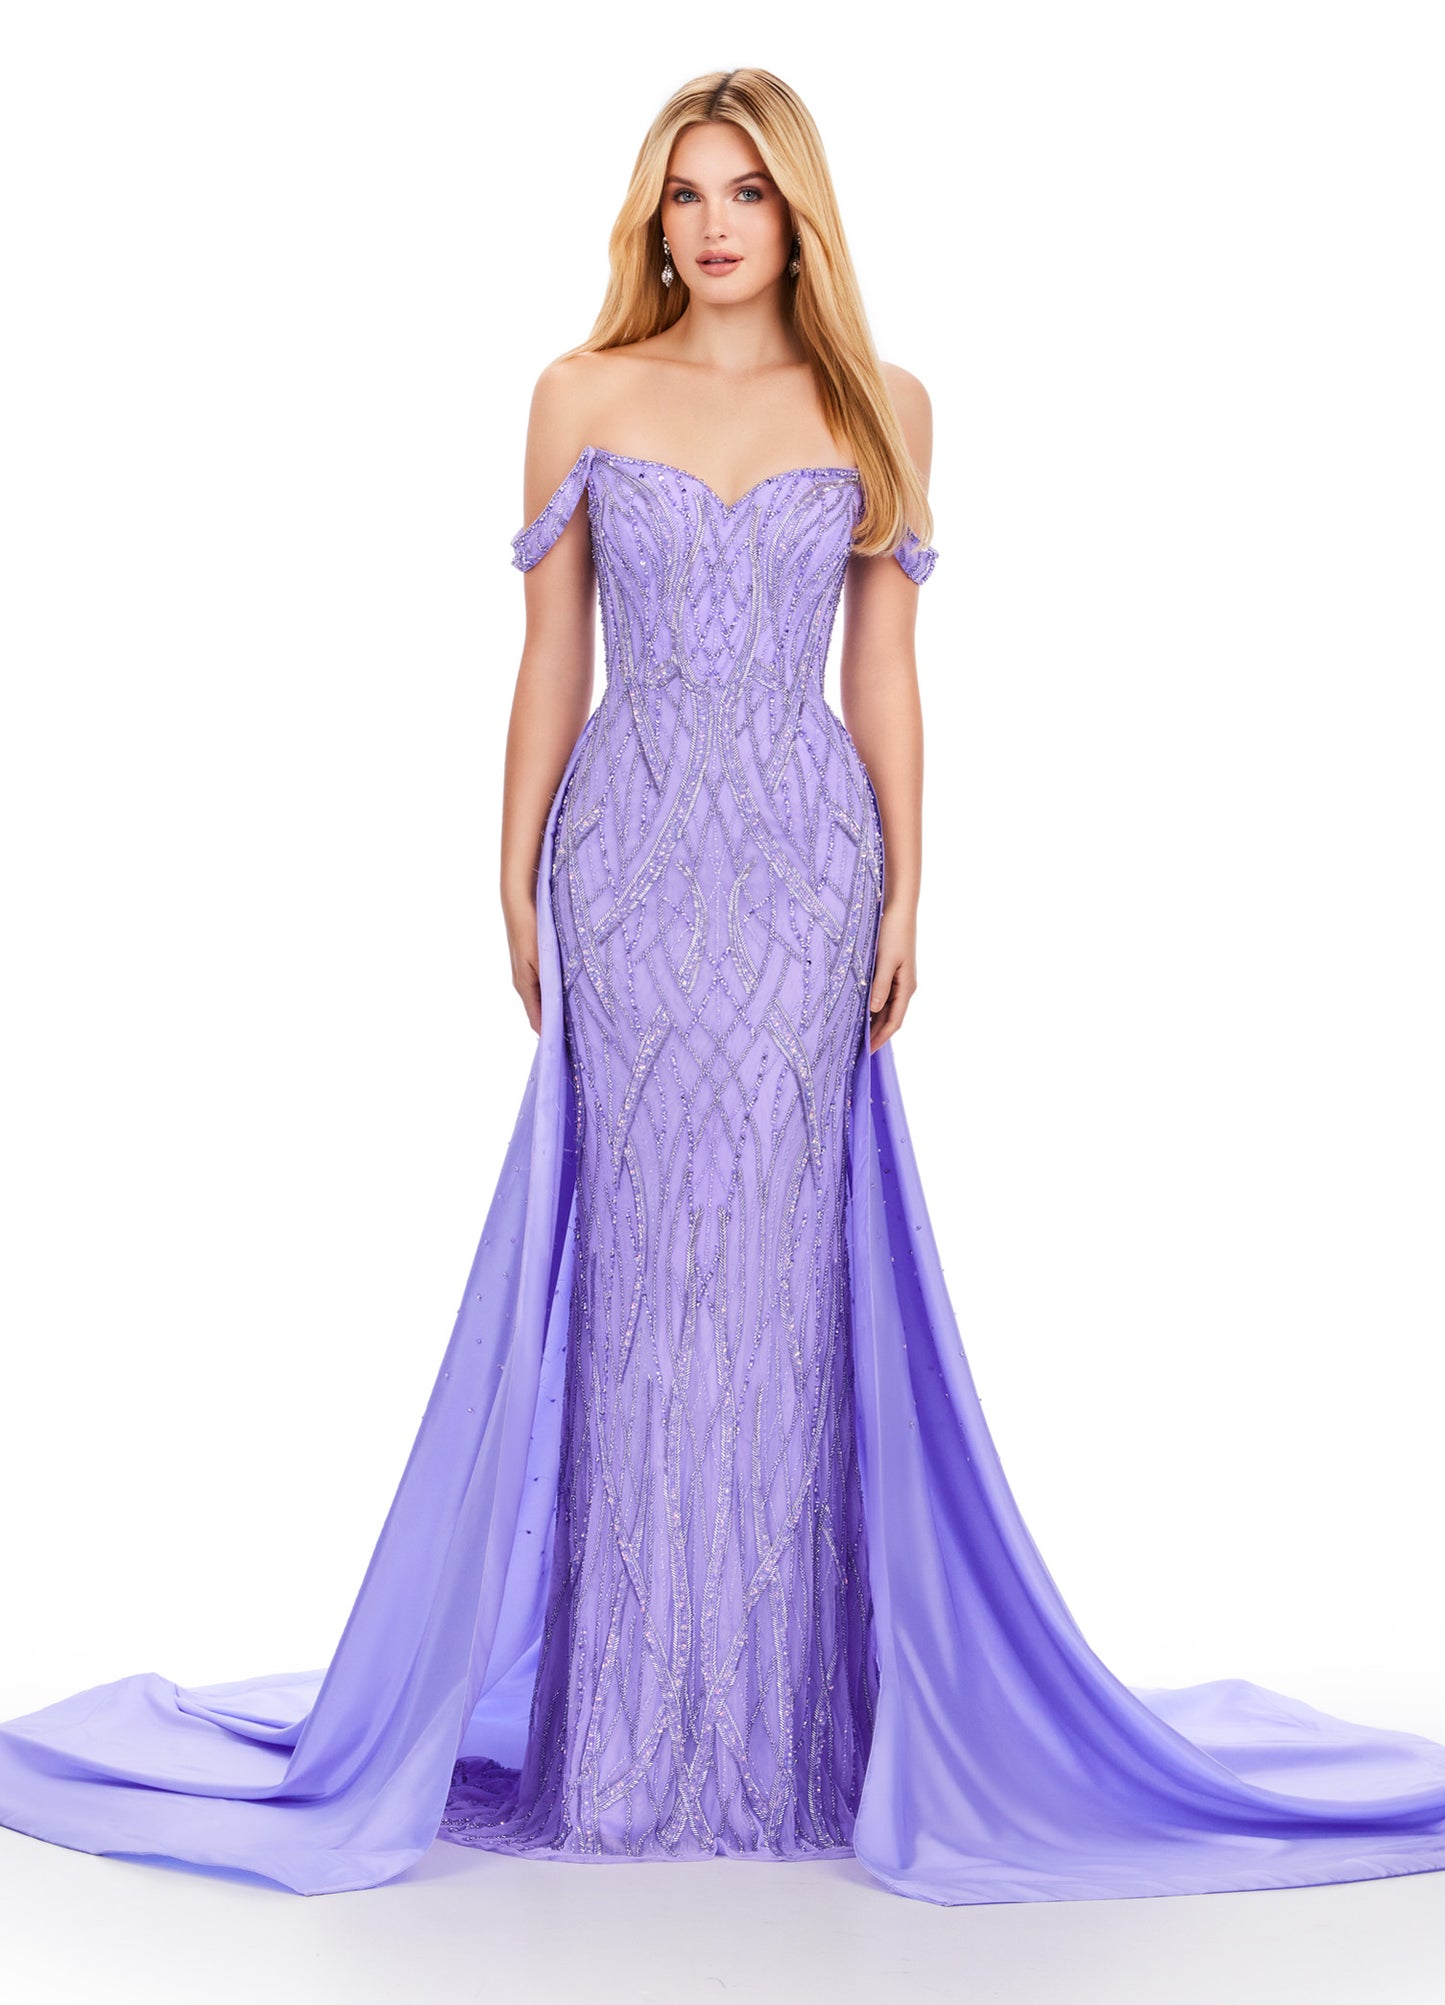 Elevate your evening look with the Ashley Lauren 11458 Long Prom Dress. This fully beaded strapless gown features a flattering off shoulder neckline and a unique draping taffeta overskirt. Perfect for formal occasions and pageants. Regal and fabulous? We got you. This fully beaded gown features an off shoulder sweetheart neckline and a dramatic taffeta overskirt to help you slay at your next event.